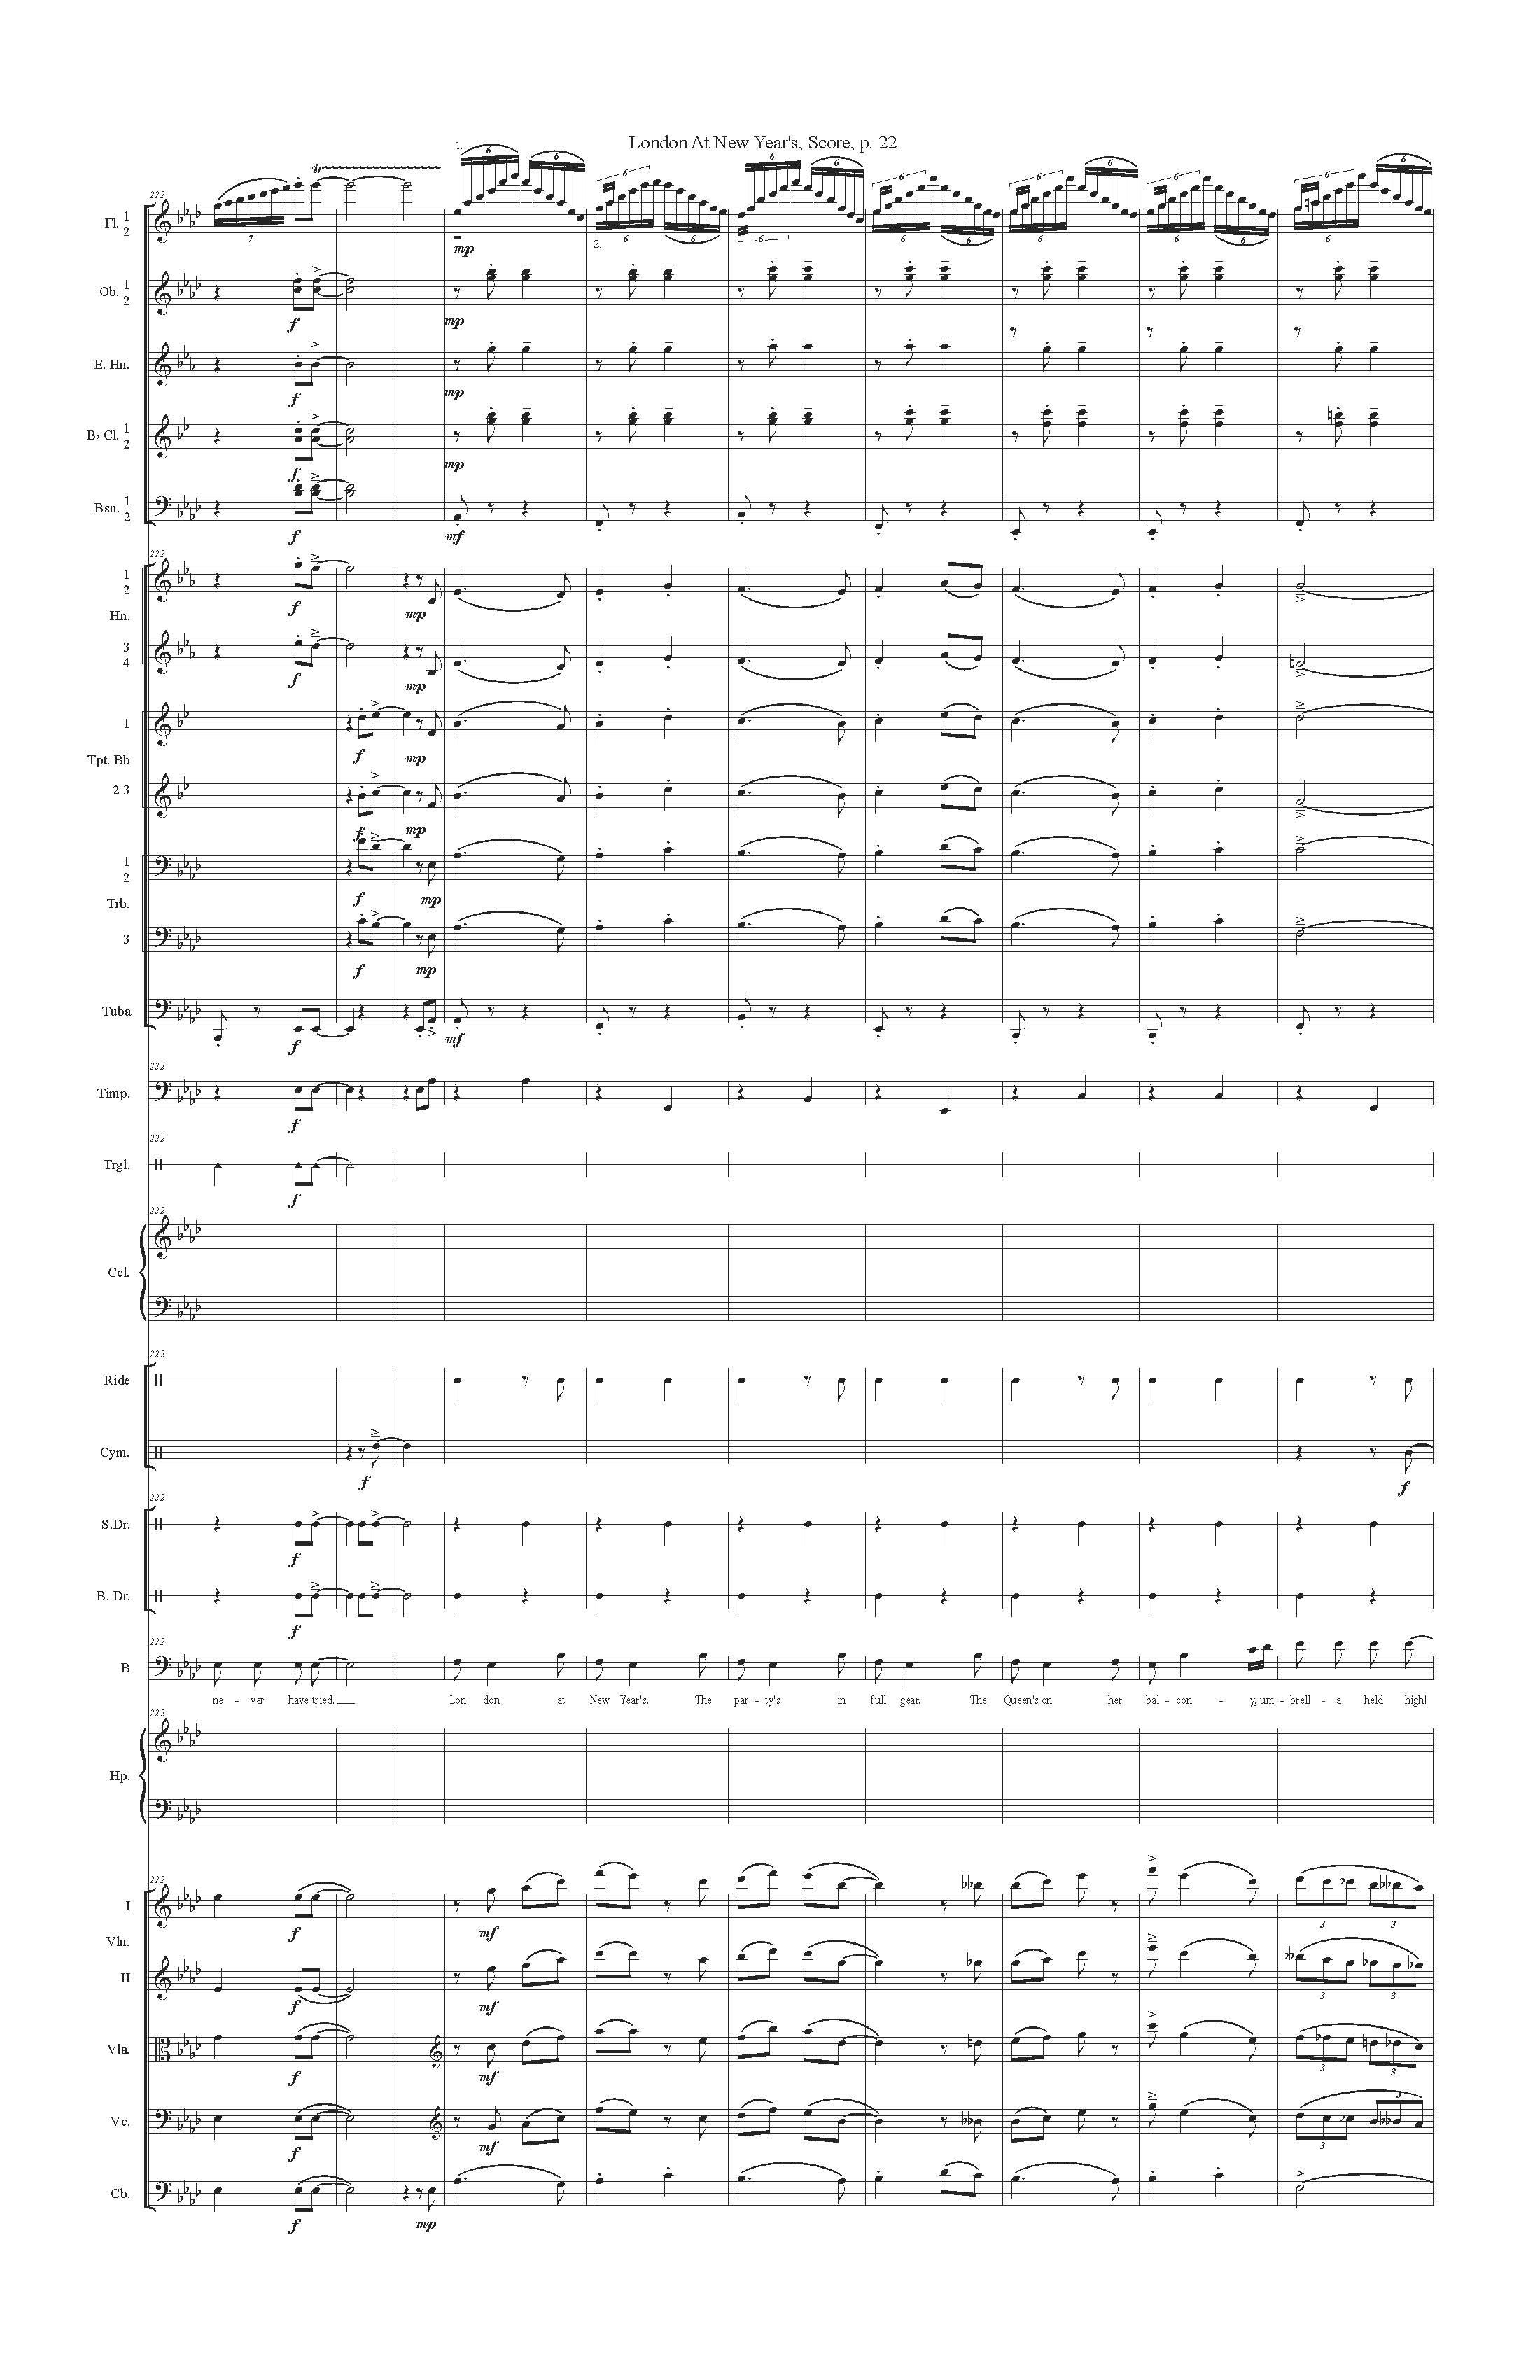 LONDON AT NEW YEARS ORCH - Score_Page_22.jpg